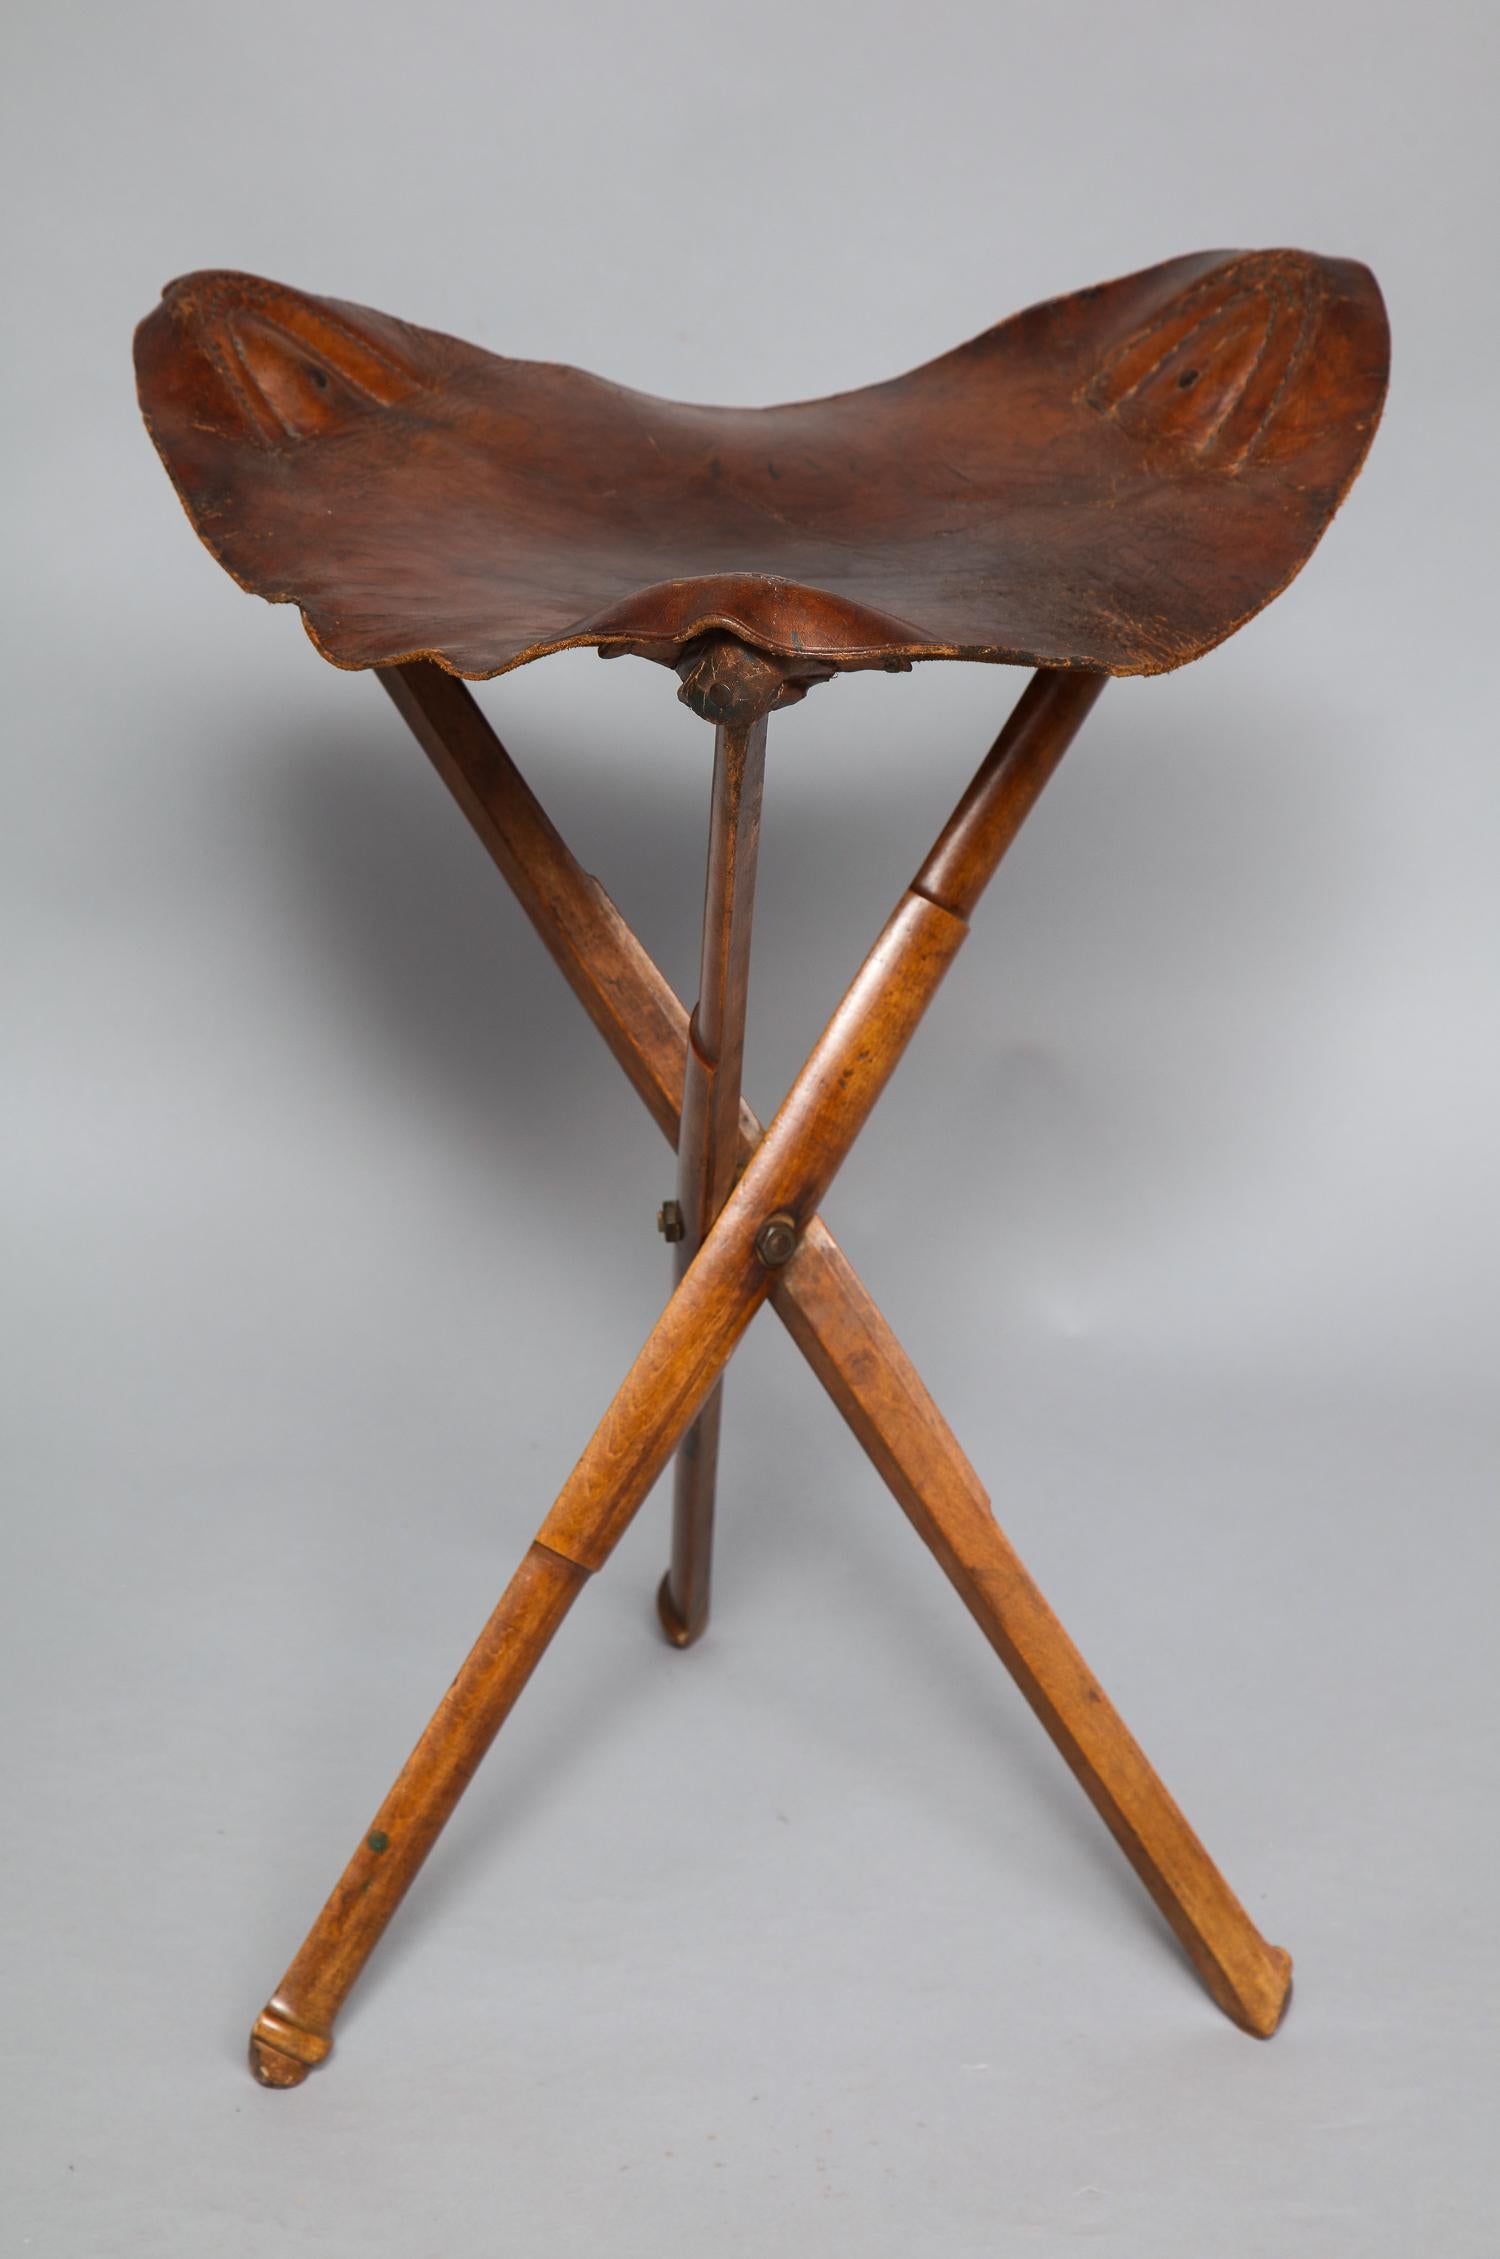 A stylish traveling stool with original leather seat on mahogany tripod frame folding to a stick with brass center pin. Used originally for picnicking or campaigning, now not strong enough for seating but good as a clothes-horse in a bedroom or